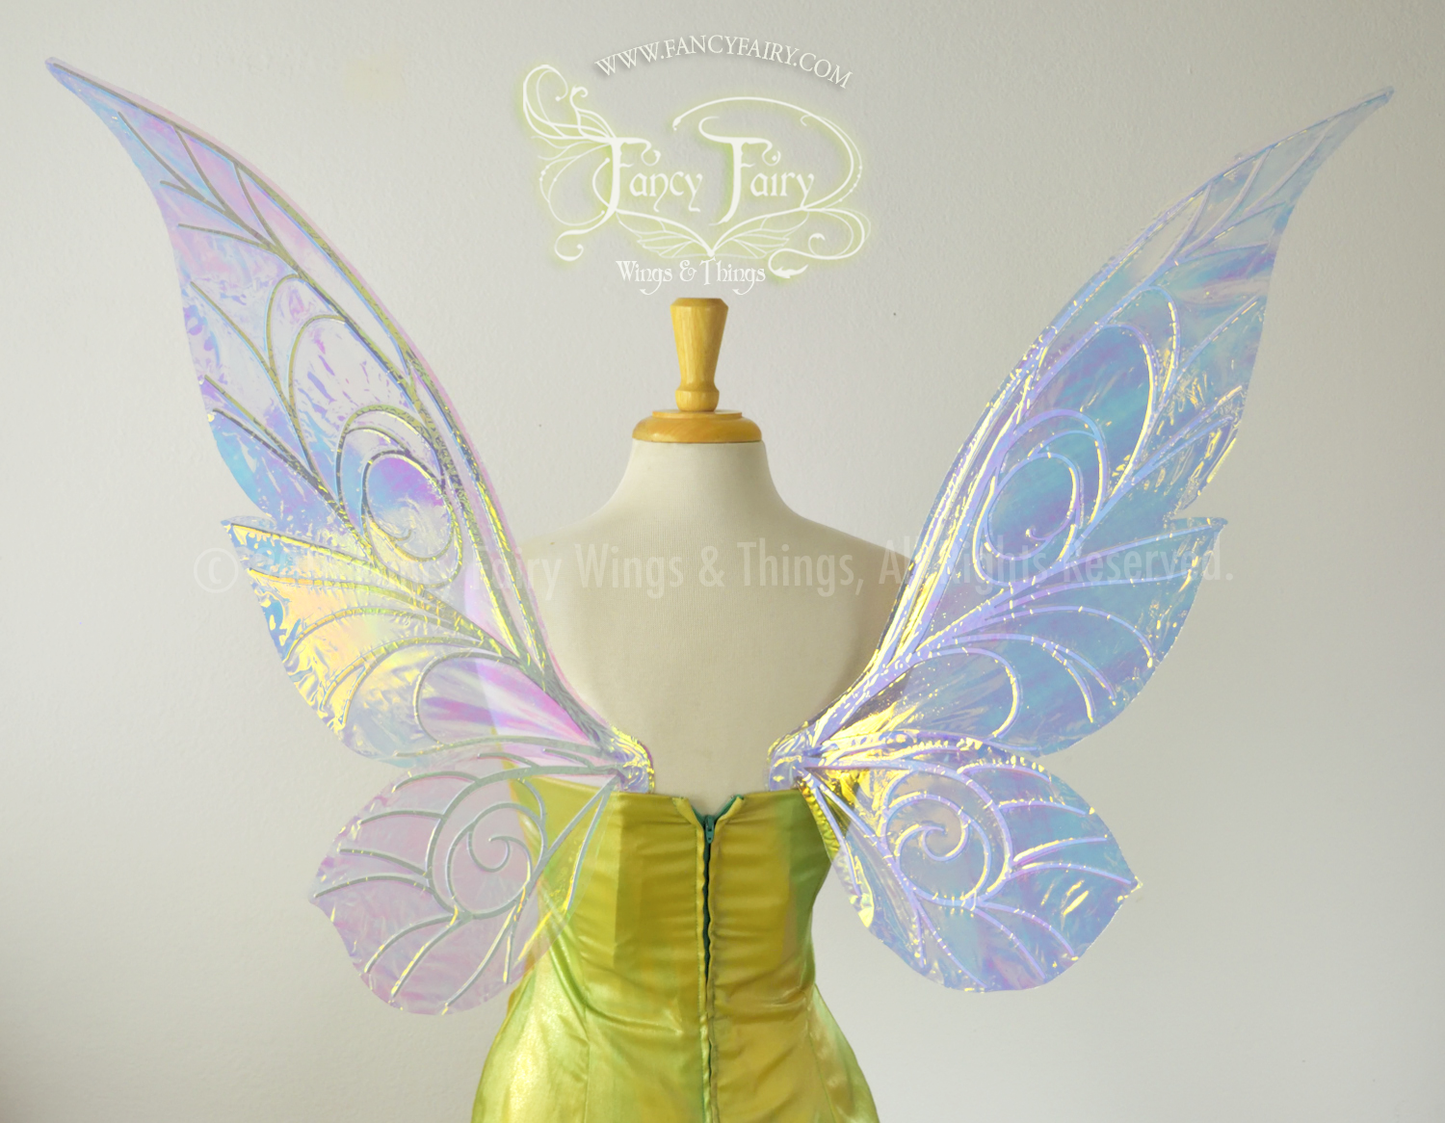 Trinket 26 inch Iridescent Fairy Wings in Clear with Pearl veins